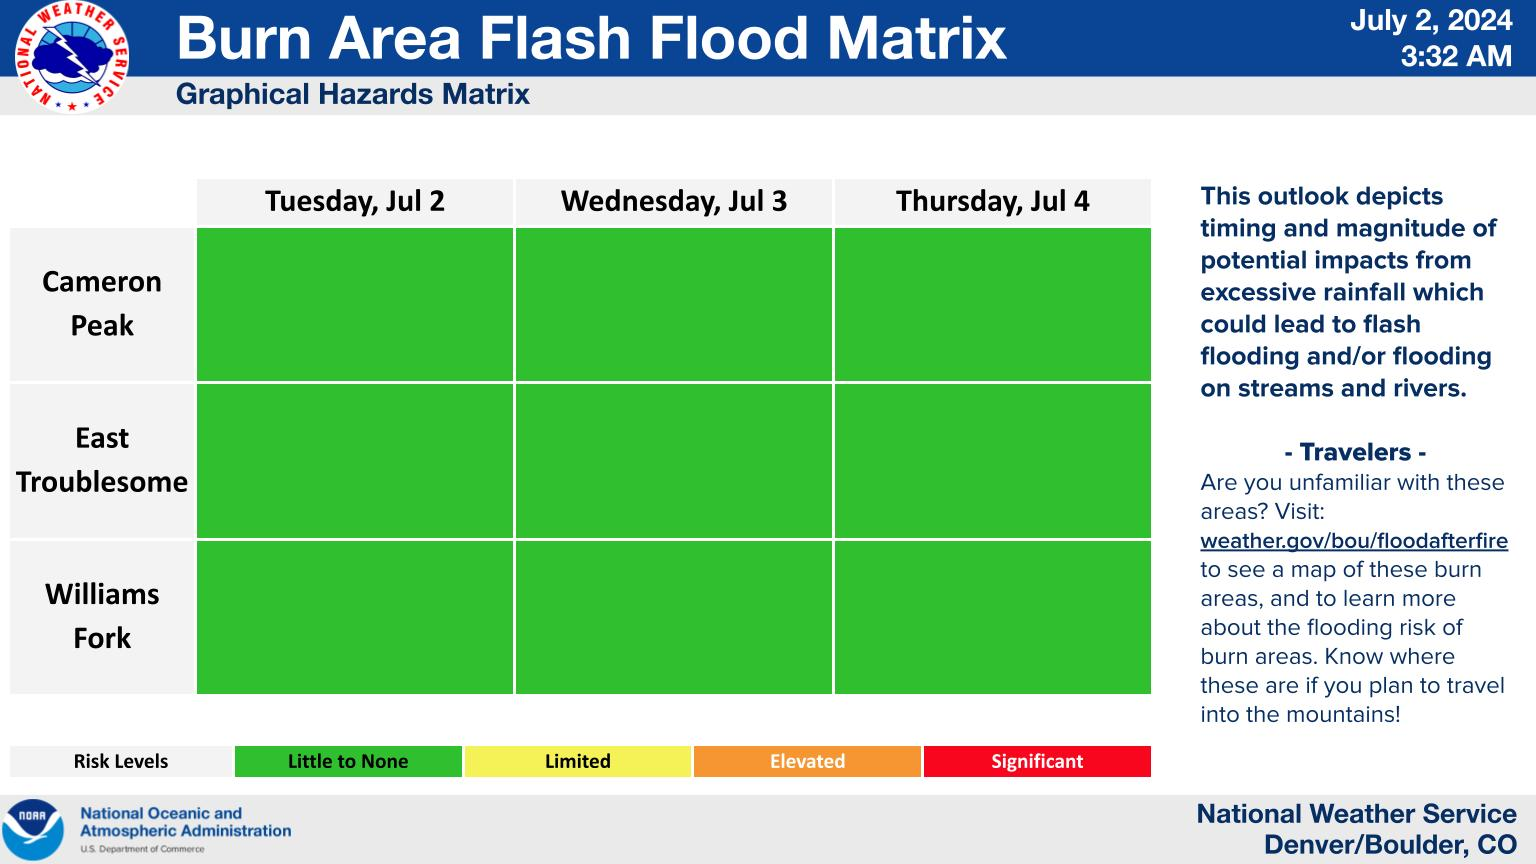 A tabular flash flood outlook for the Cameron Peak, East Troublesome, and Williams Fork burn areas.